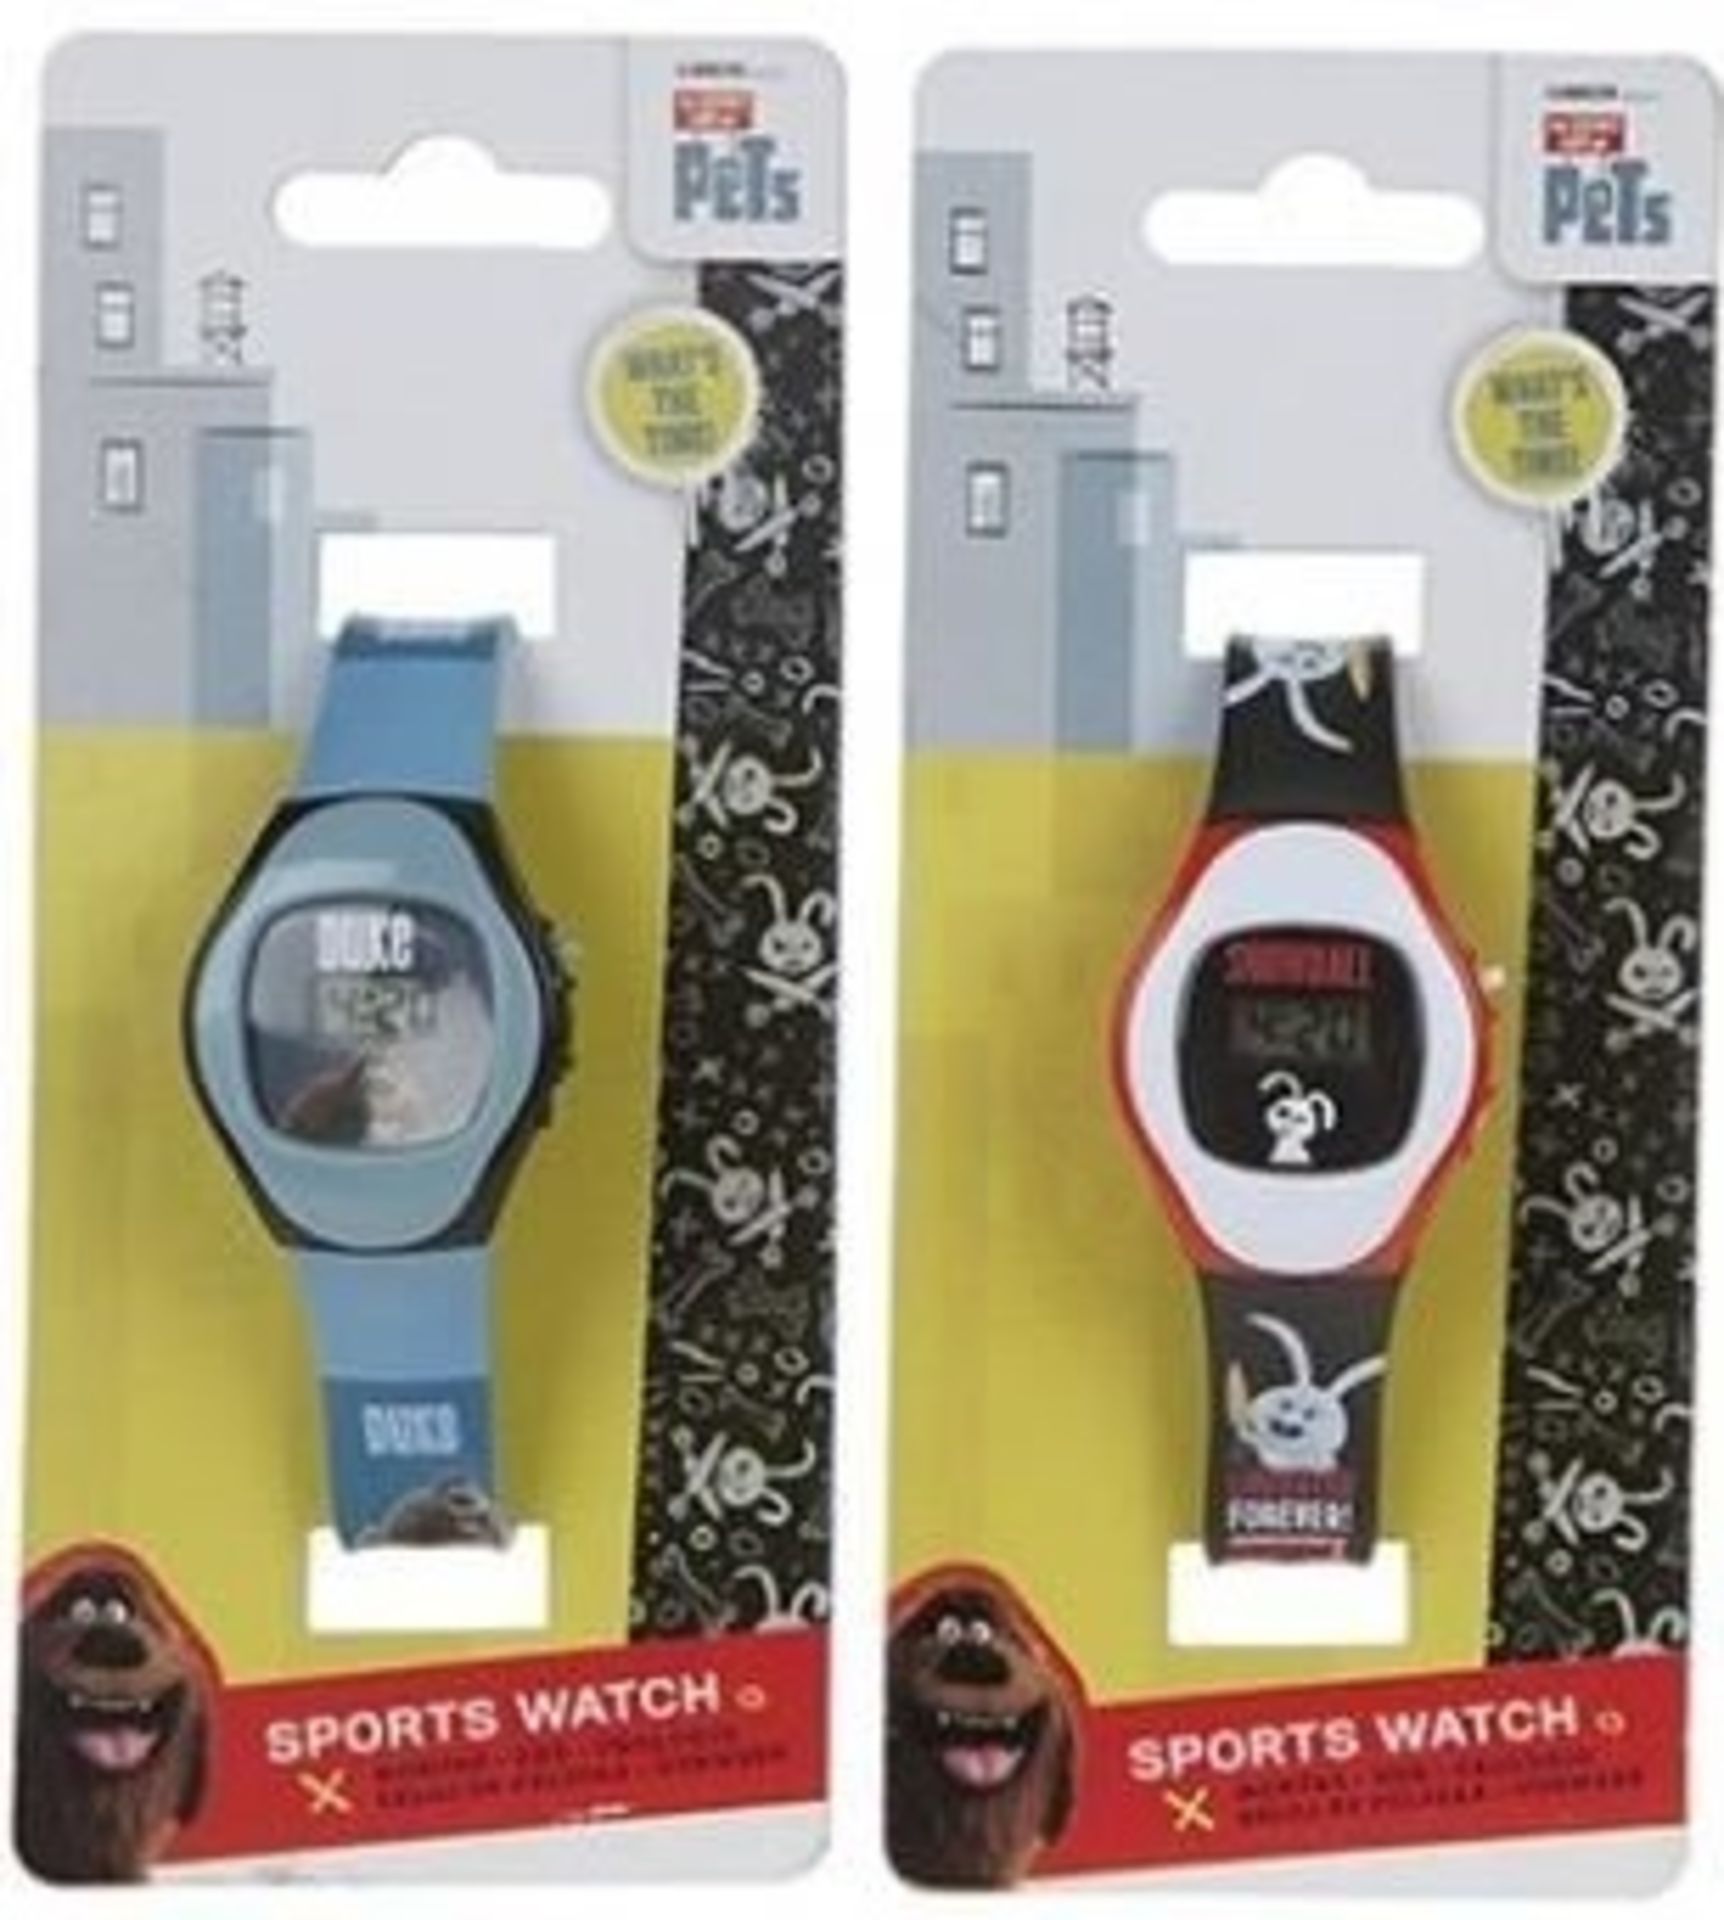 V Brand New The Secret Life Of Pets Childs Digital Watch (Items May Vary) - Image 2 of 2